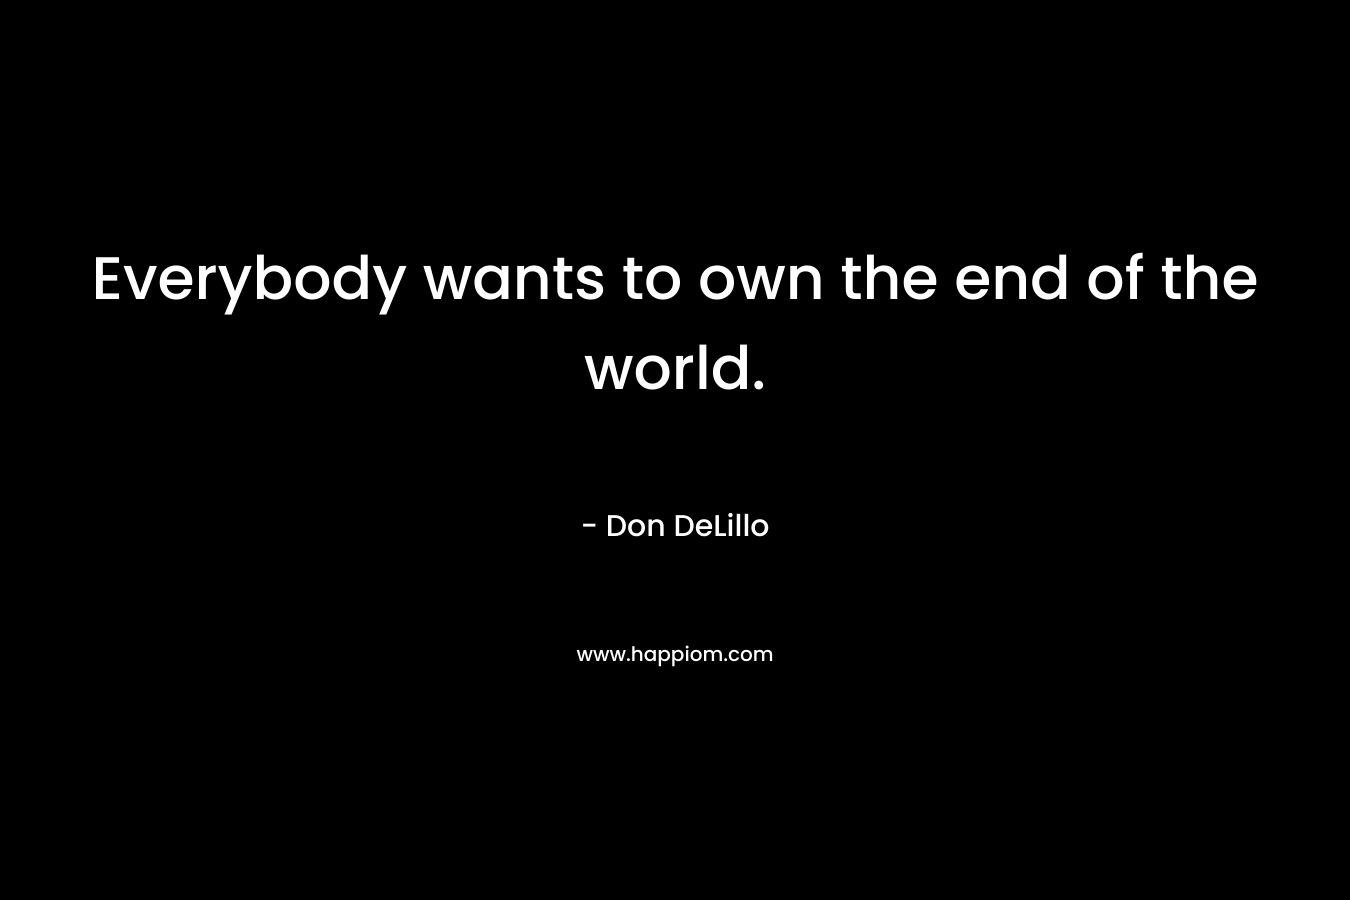 Everybody wants to own the end of the world.